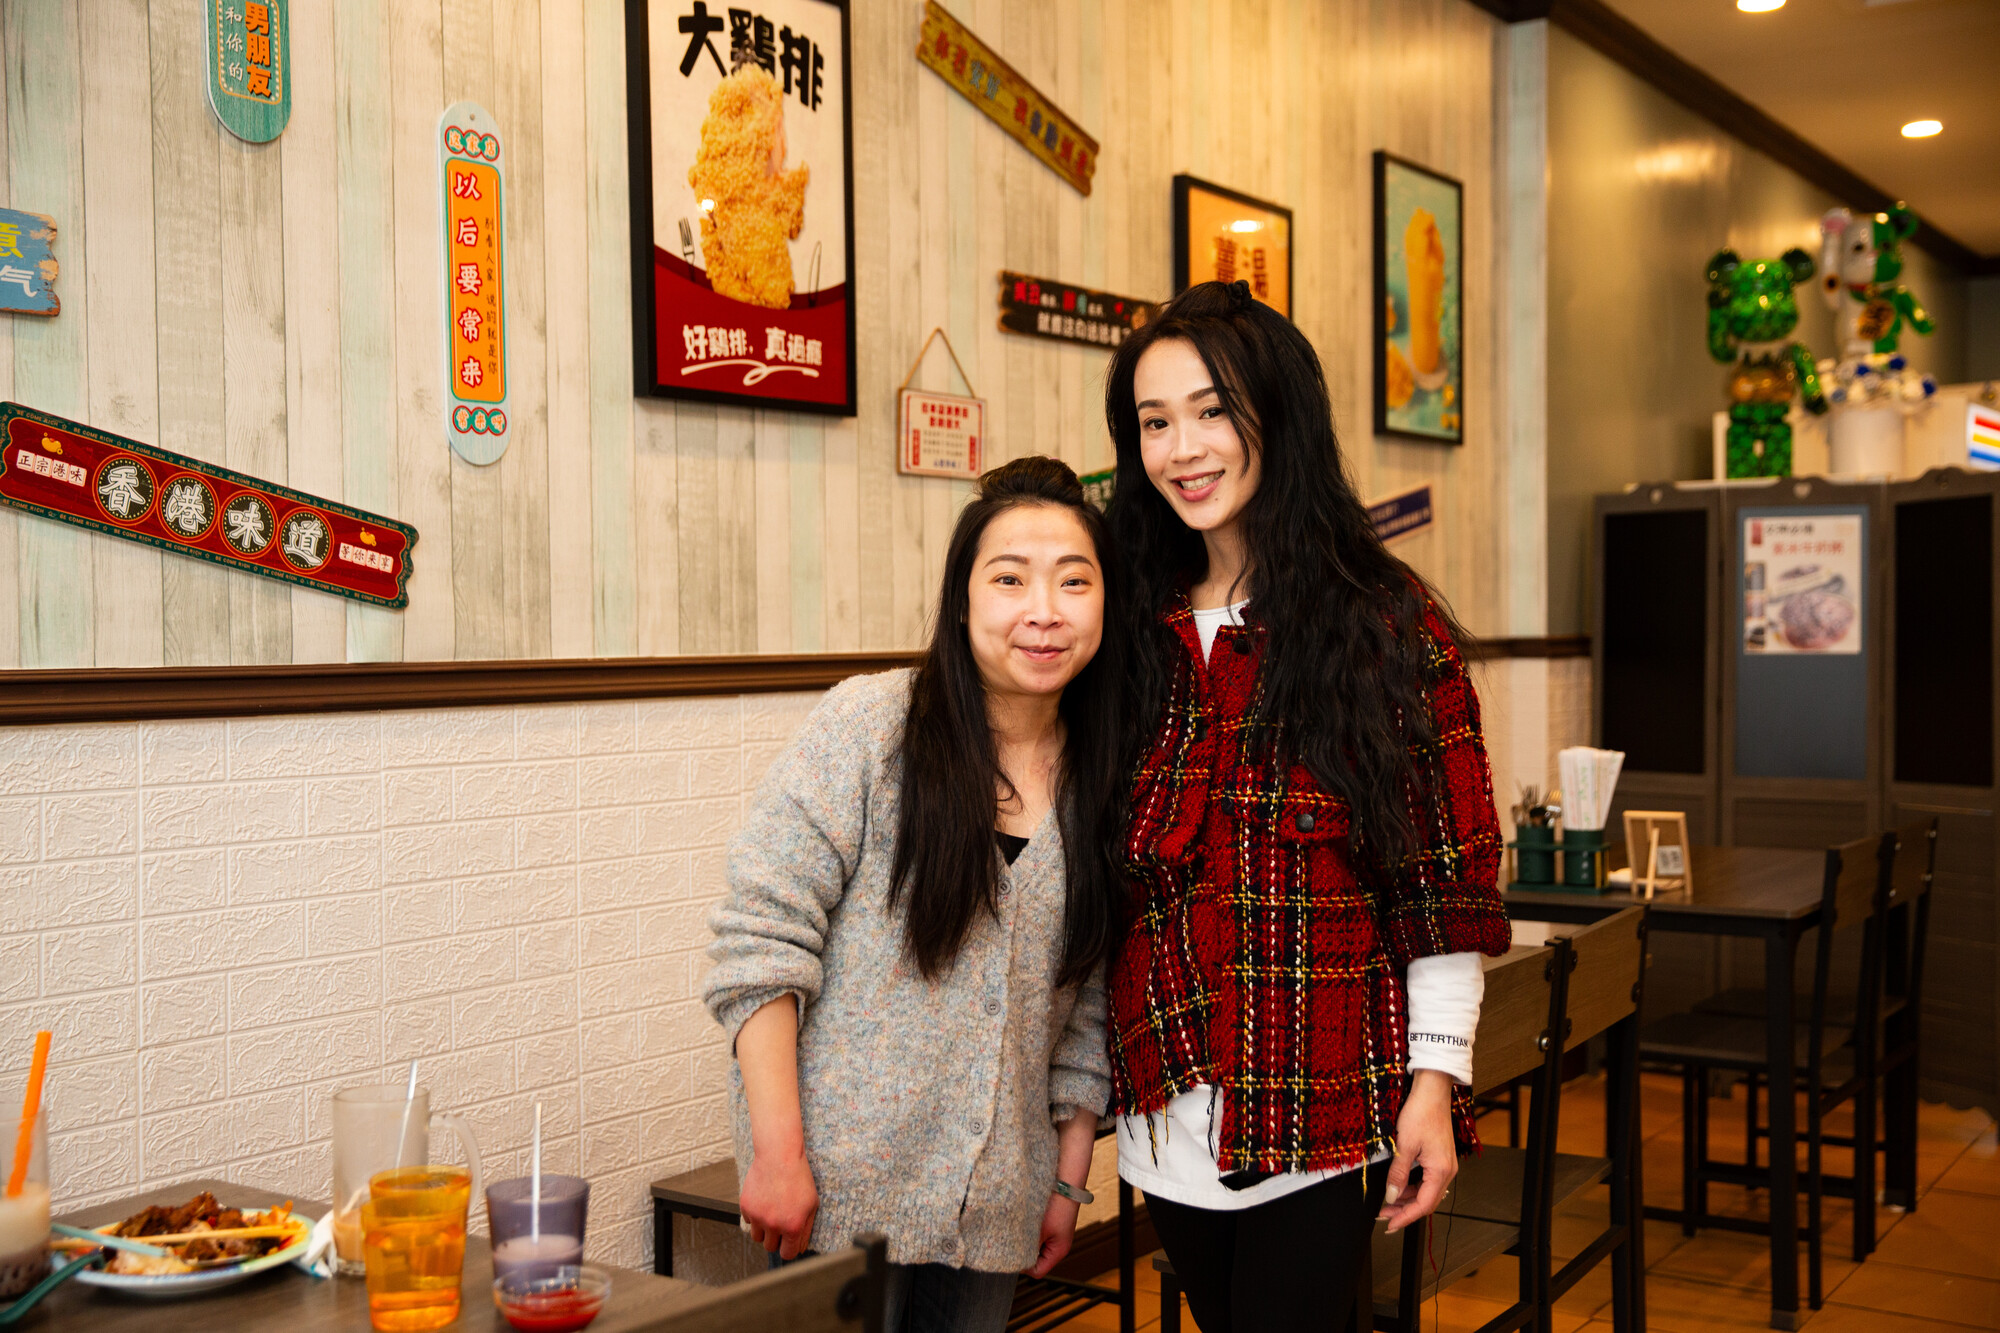 Two Asian women with long hair pose for a portrait inside a restaurant.